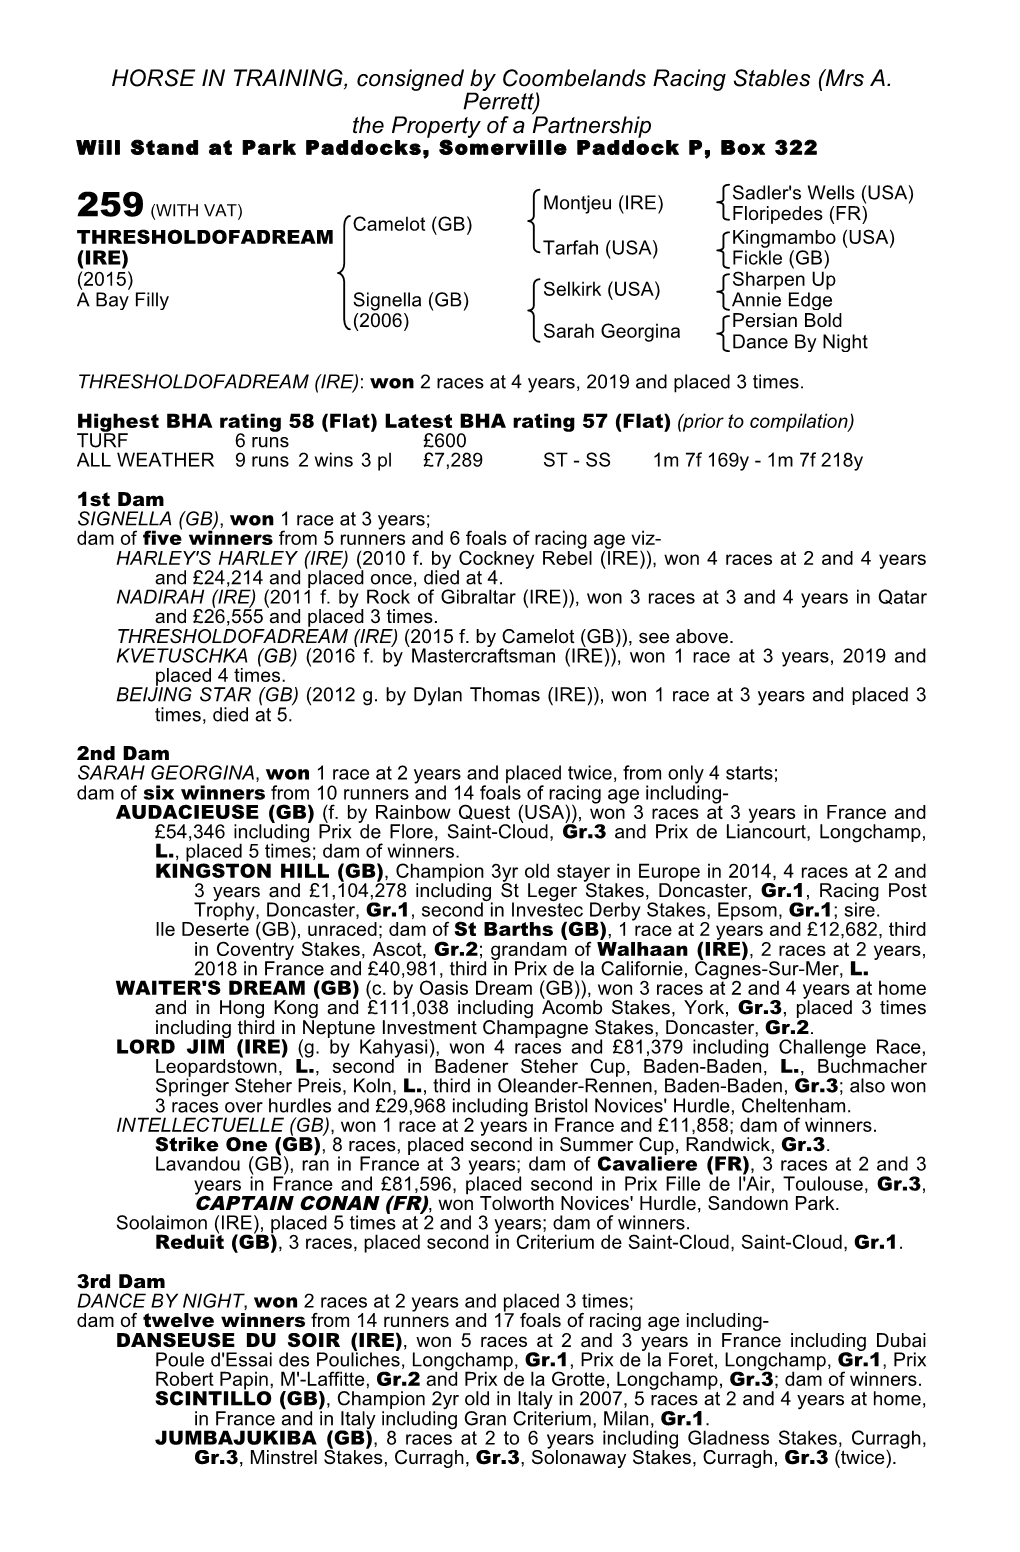 HORSE in TRAINING, Consigned by Coombelands Racing Stables (Mrs A. Perrett) the Property of a Partnership Will Stand at Park Paddocks, Somerville Paddock P, Box 322